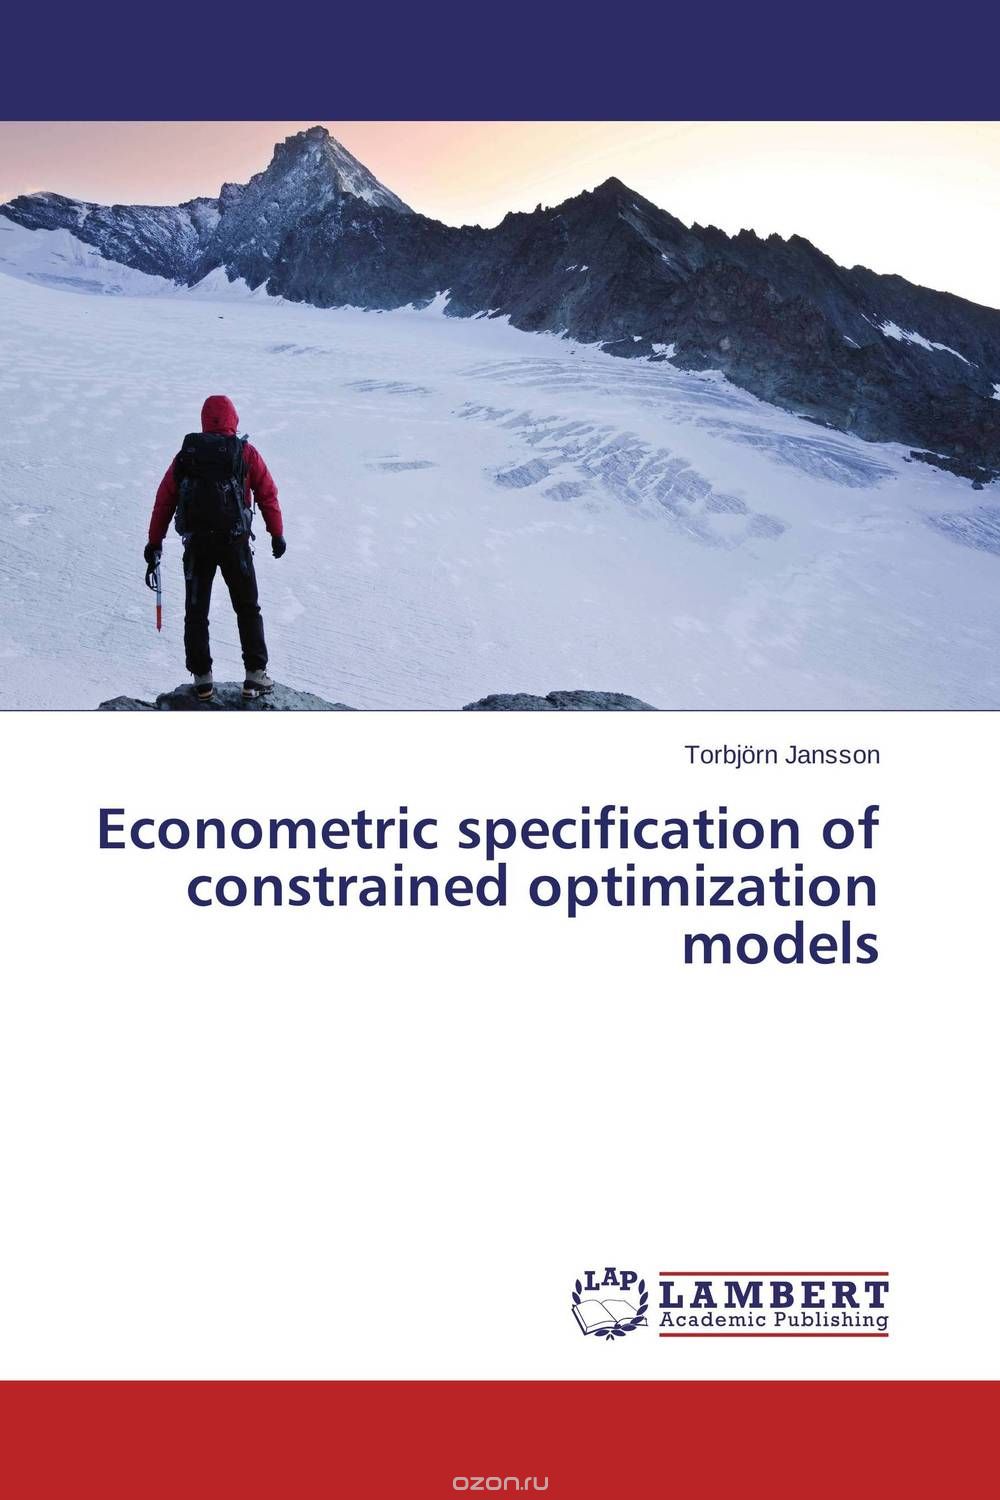 Econometric specification of constrained optimization models